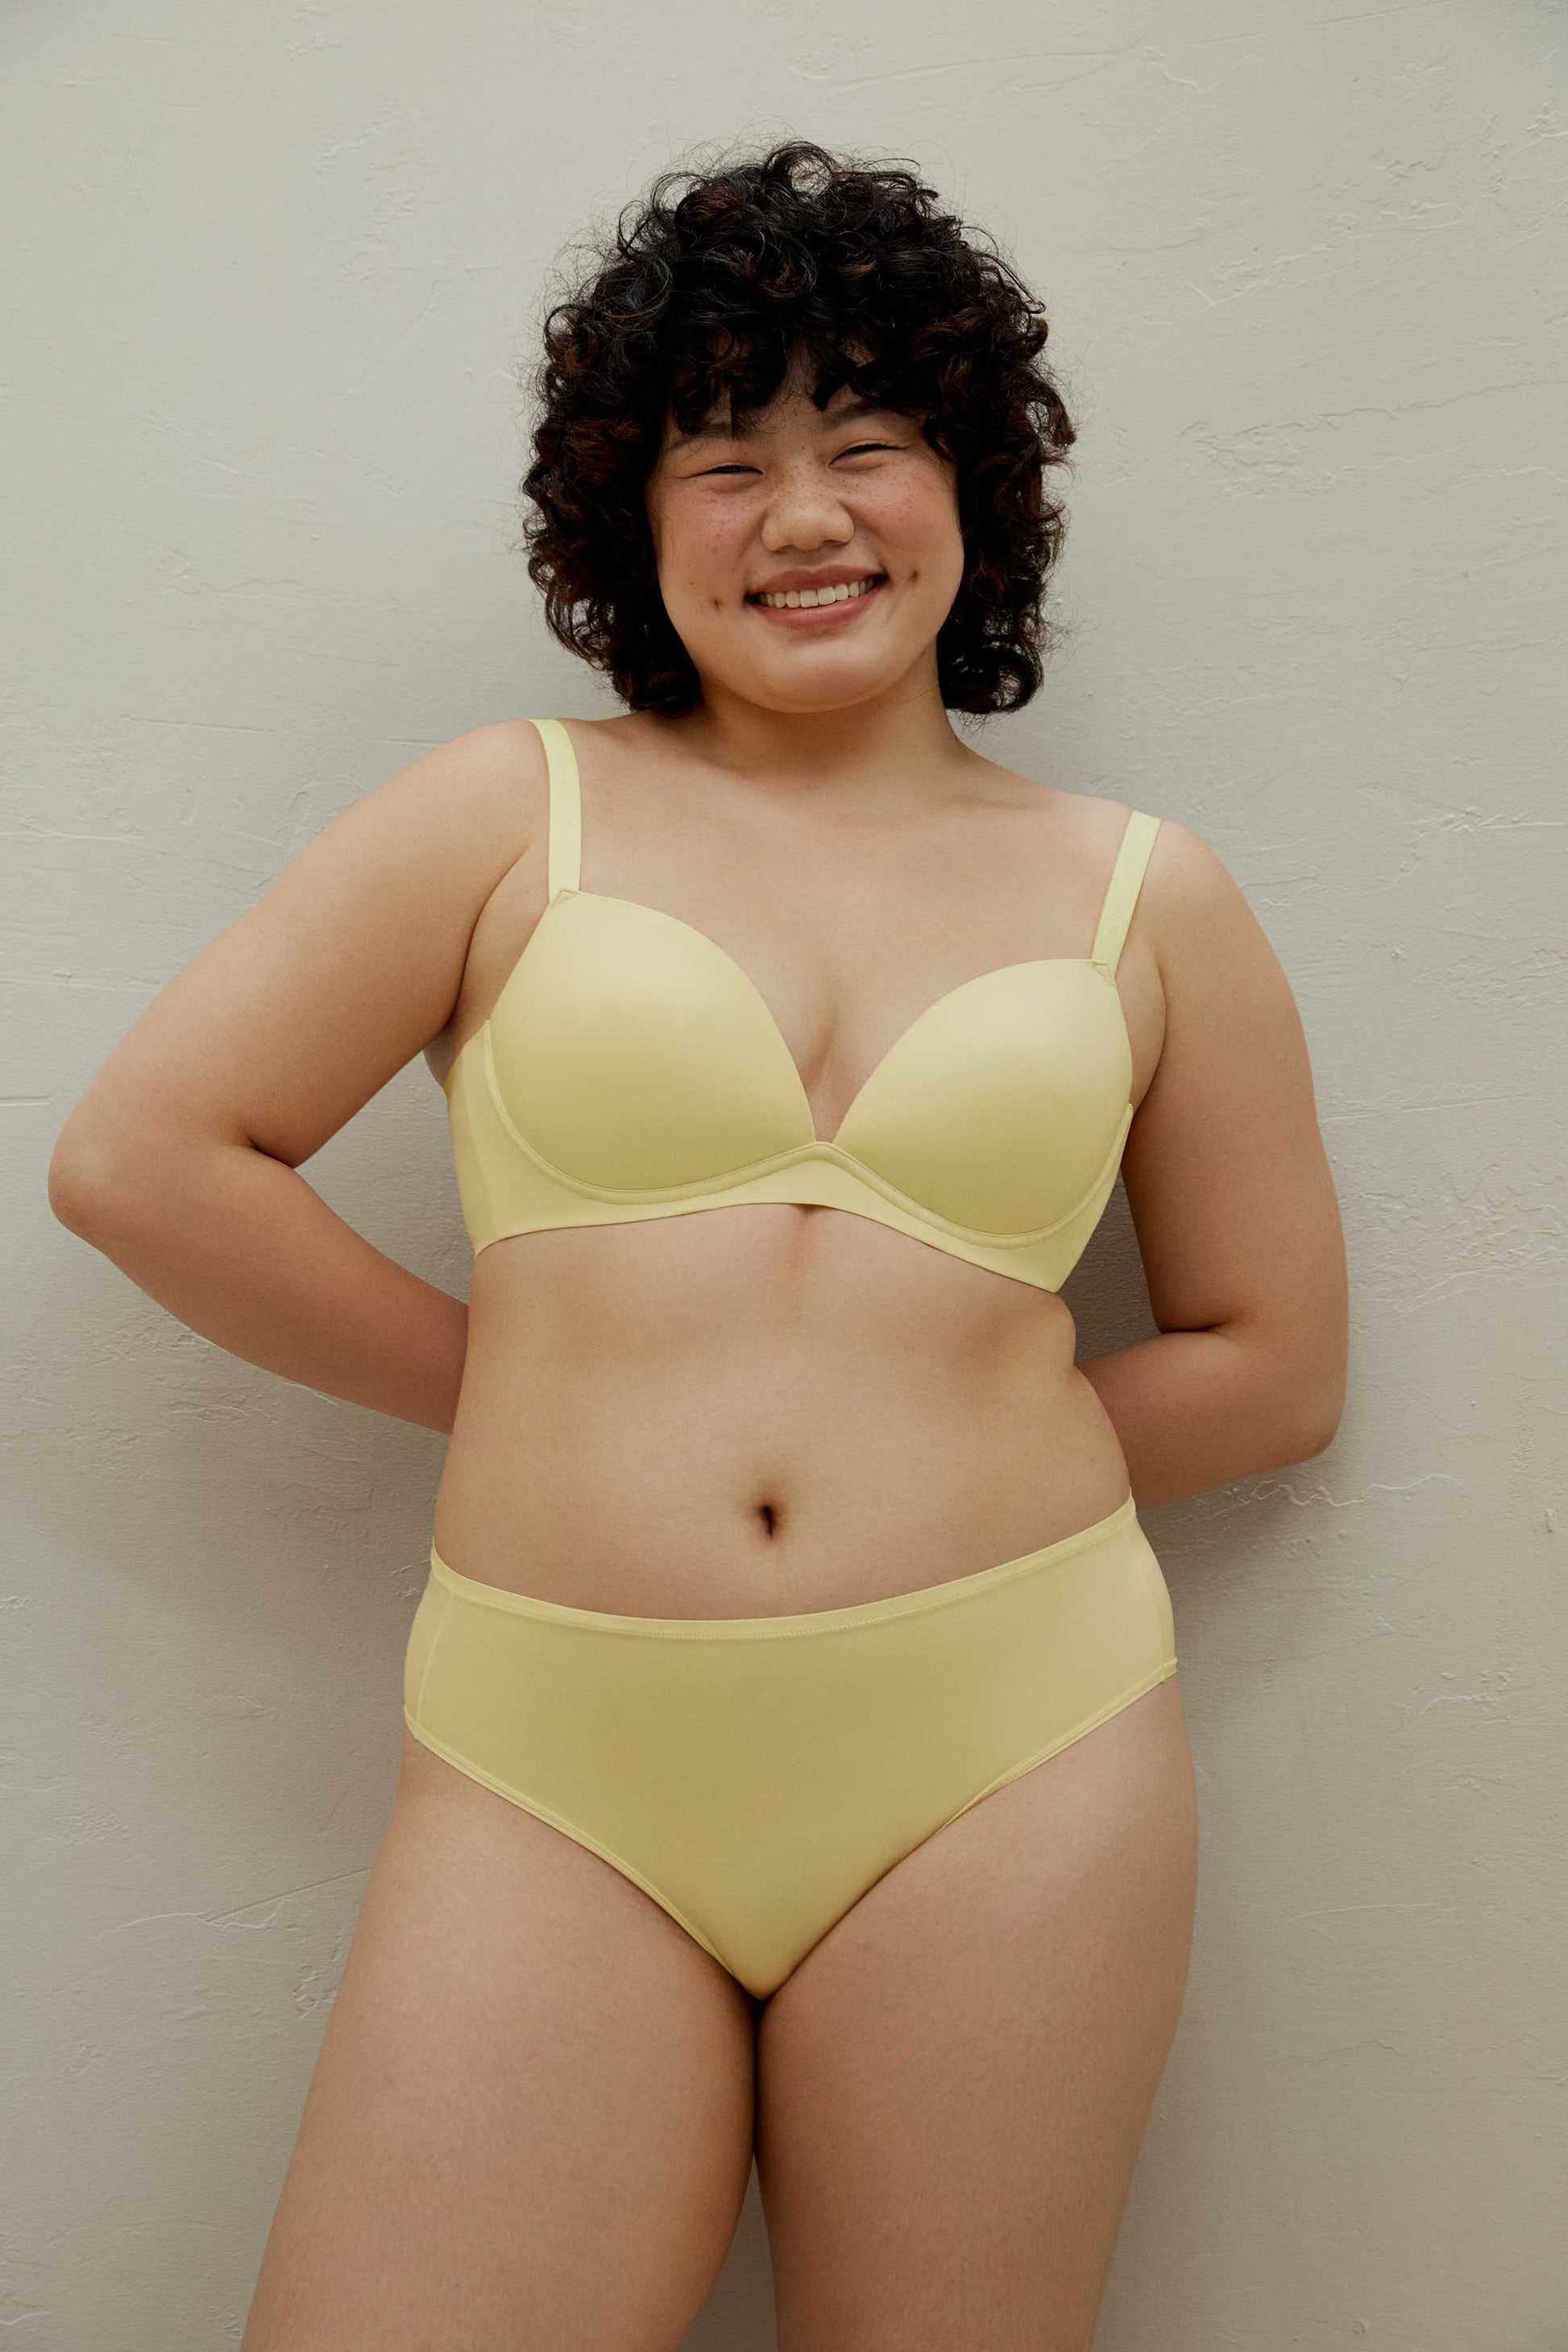 Woman wearing yellow bra and brief